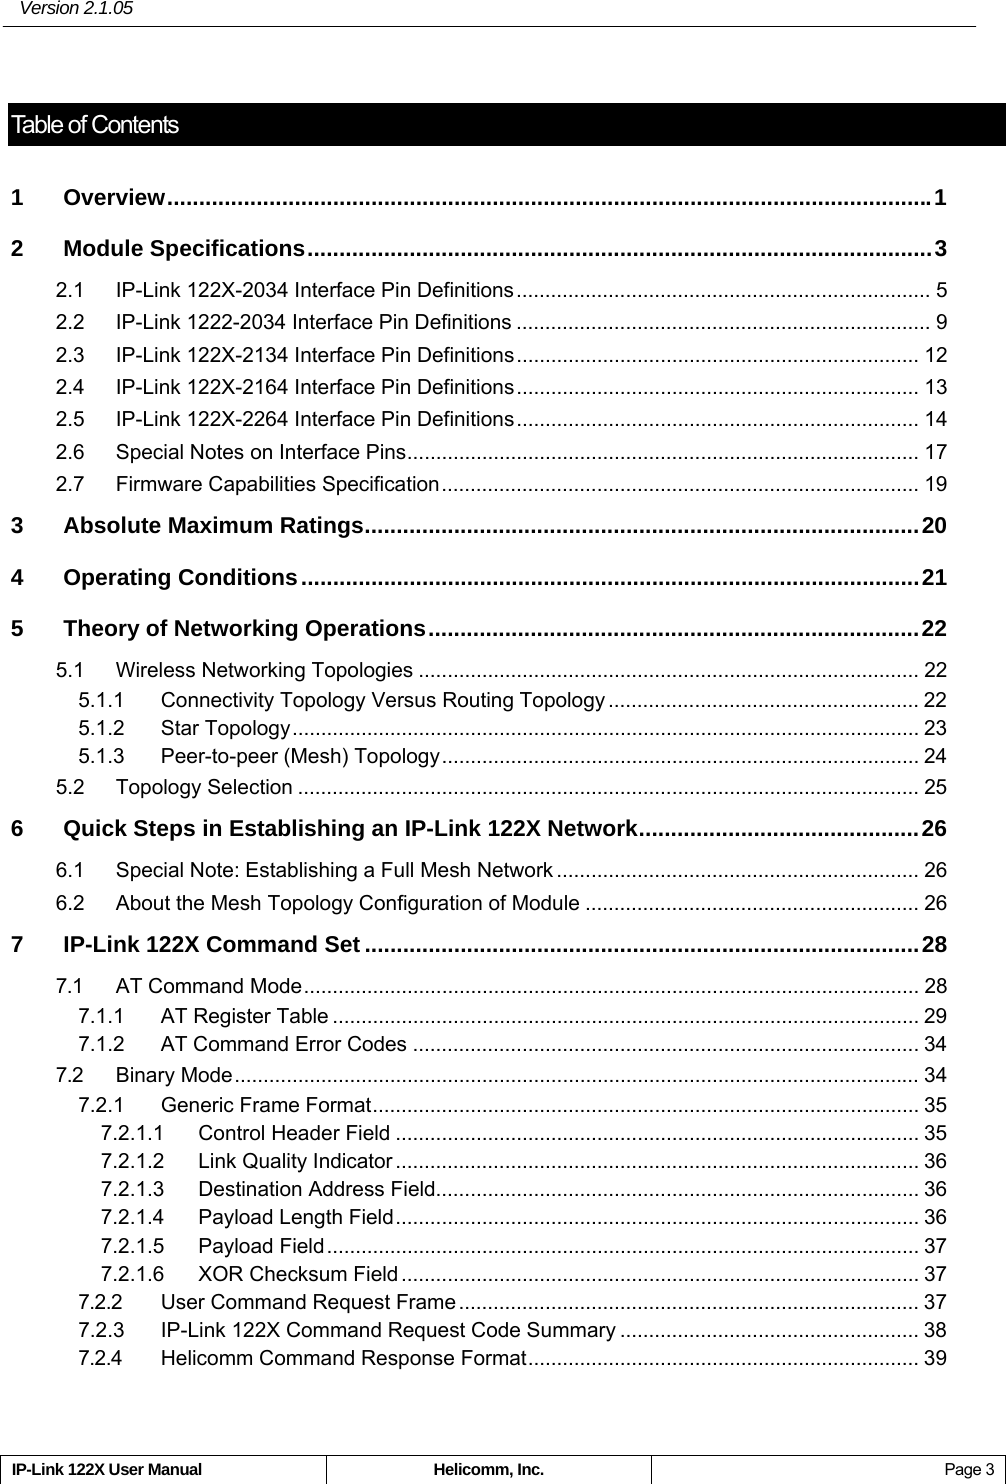  Version 2.1.05 IP-Link 122X User Manual  Helicomm, Inc.  Page 3  Table of Contents1 Overview........................................................................................................................1 2 Module Specifications..................................................................................................3 2.1 IP-Link 122X-2034 Interface Pin Definitions........................................................................ 5 2.2 IP-Link 1222-2034 Interface Pin Definitions ........................................................................ 9 2.3 IP-Link 122X-2134 Interface Pin Definitions...................................................................... 12 2.4 IP-Link 122X-2164 Interface Pin Definitions...................................................................... 13 2.5 IP-Link 122X-2264 Interface Pin Definitions...................................................................... 14 2.6 Special Notes on Interface Pins......................................................................................... 17 2.7 Firmware Capabilities Specification................................................................................... 19 3 Absolute Maximum Ratings.......................................................................................20 4 Operating Conditions.................................................................................................21 5 Theory of Networking Operations.............................................................................22 5.1 Wireless Networking Topologies ....................................................................................... 22 5.1.1 Connectivity Topology Versus Routing Topology ...................................................... 22 5.1.2 Star Topology............................................................................................................. 23 5.1.3 Peer-to-peer (Mesh) Topology................................................................................... 24 5.2 Topology Selection ............................................................................................................ 25 6 Quick Steps in Establishing an IP-Link 122X Network............................................26 6.1 Special Note: Establishing a Full Mesh Network ............................................................... 26 6.2 About the Mesh Topology Configuration of Module .......................................................... 26 7 IP-Link 122X Command Set .......................................................................................28 7.1 AT Command Mode........................................................................................................... 28 7.1.1 AT Register Table ...................................................................................................... 29 7.1.2 AT Command Error Codes ........................................................................................ 34 7.2 Binary Mode....................................................................................................................... 34 7.2.1 Generic Frame Format............................................................................................... 35 7.2.1.1 Control Header Field ........................................................................................... 35 7.2.1.2 Link Quality Indicator ........................................................................................... 36 7.2.1.3 Destination Address Field.................................................................................... 36 7.2.1.4 Payload Length Field........................................................................................... 36 7.2.1.5 Payload Field....................................................................................................... 37 7.2.1.6 XOR Checksum Field .......................................................................................... 37 7.2.2 User Command Request Frame................................................................................ 37 7.2.3 IP-Link 122X Command Request Code Summary .................................................... 38 7.2.4 Helicomm Command Response Format.................................................................... 39 